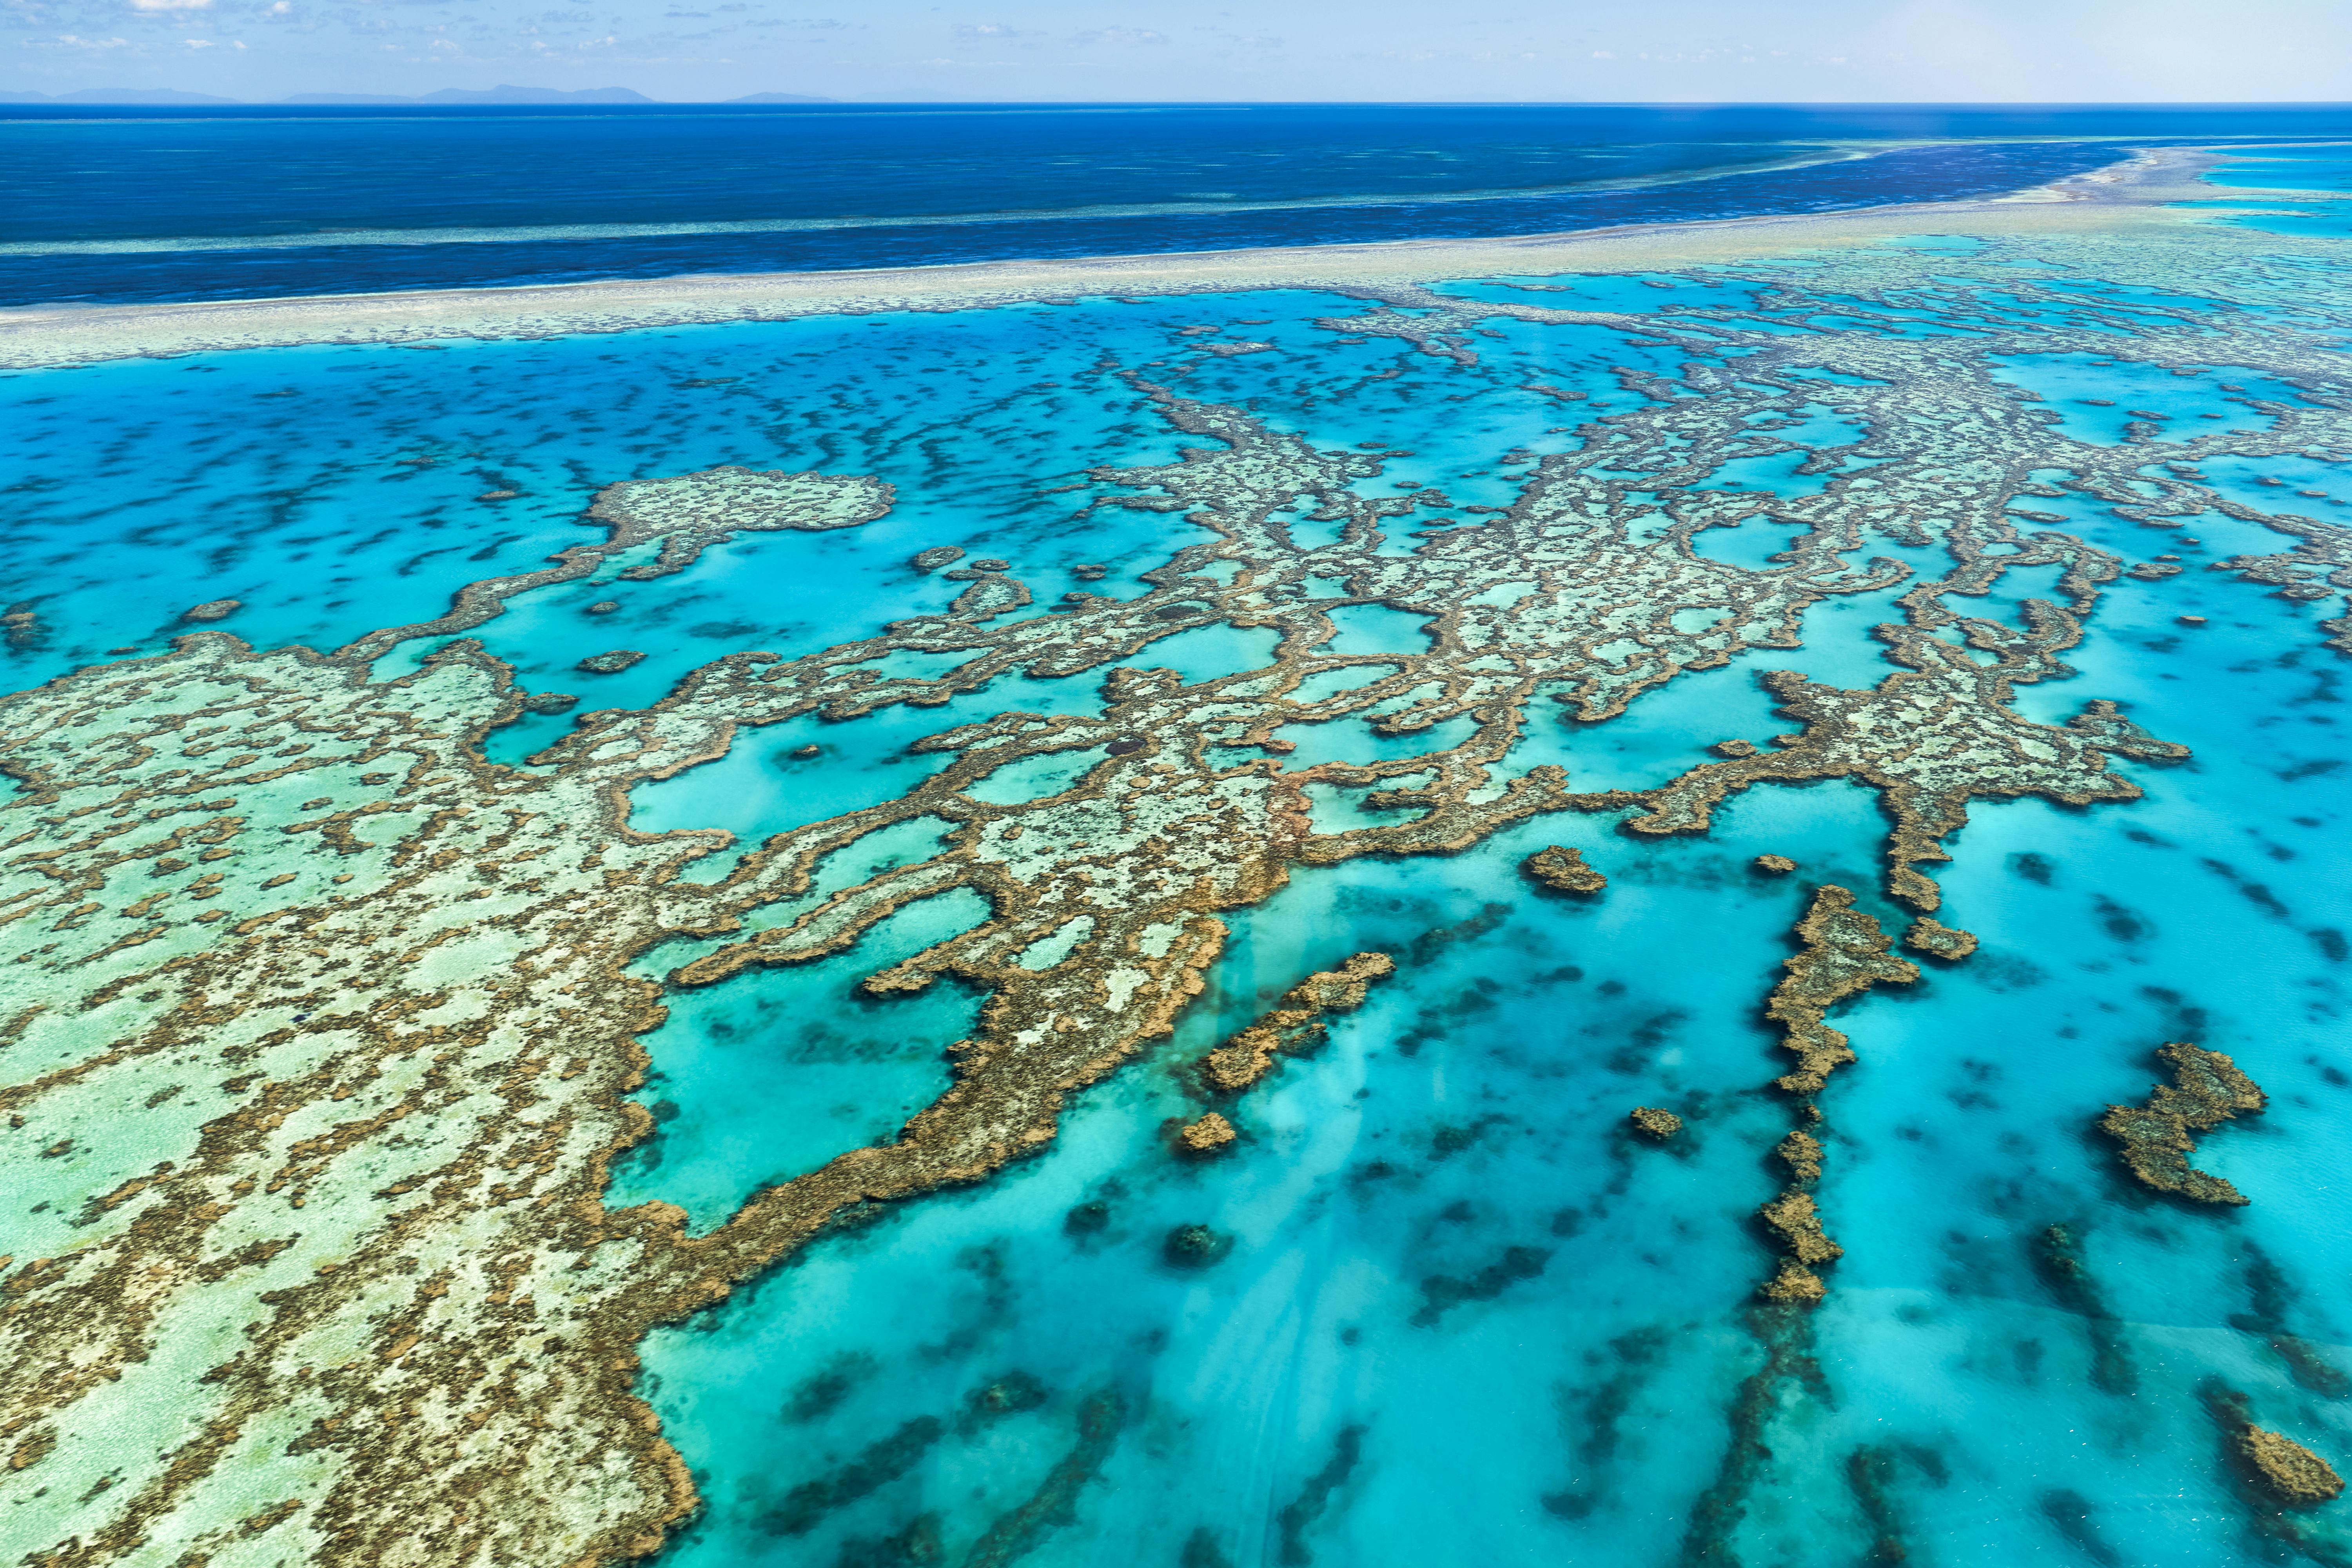 Full-day snorkel experience at the Great Barrier Reef